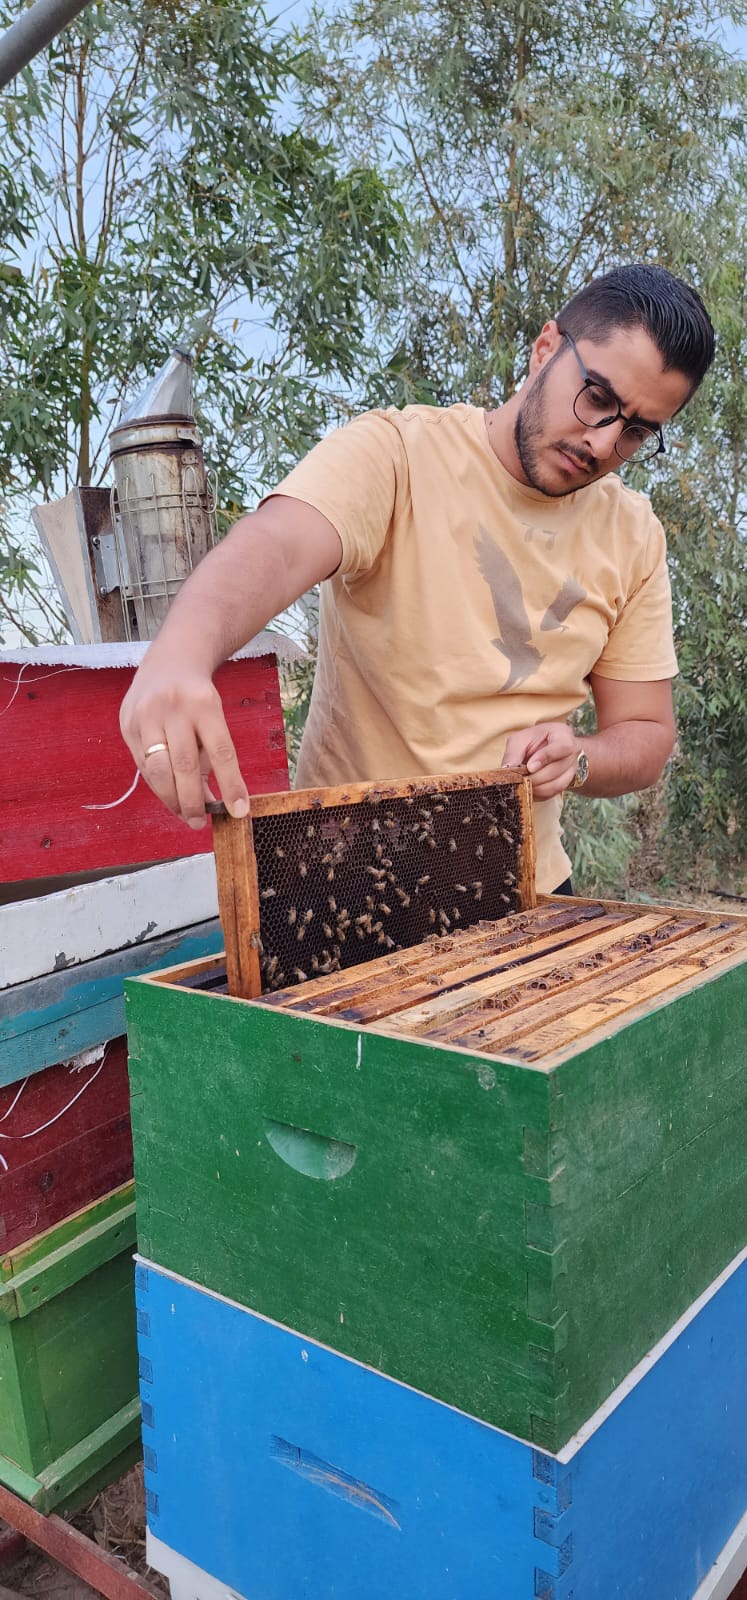 This image portrays Isen as he carefully inspects the remarkable progress made by the bees in &quot;drawing out&quot; honeycombs within one of the five newly established beehives in Karamles village, located in the Al-Hamdaniya district.